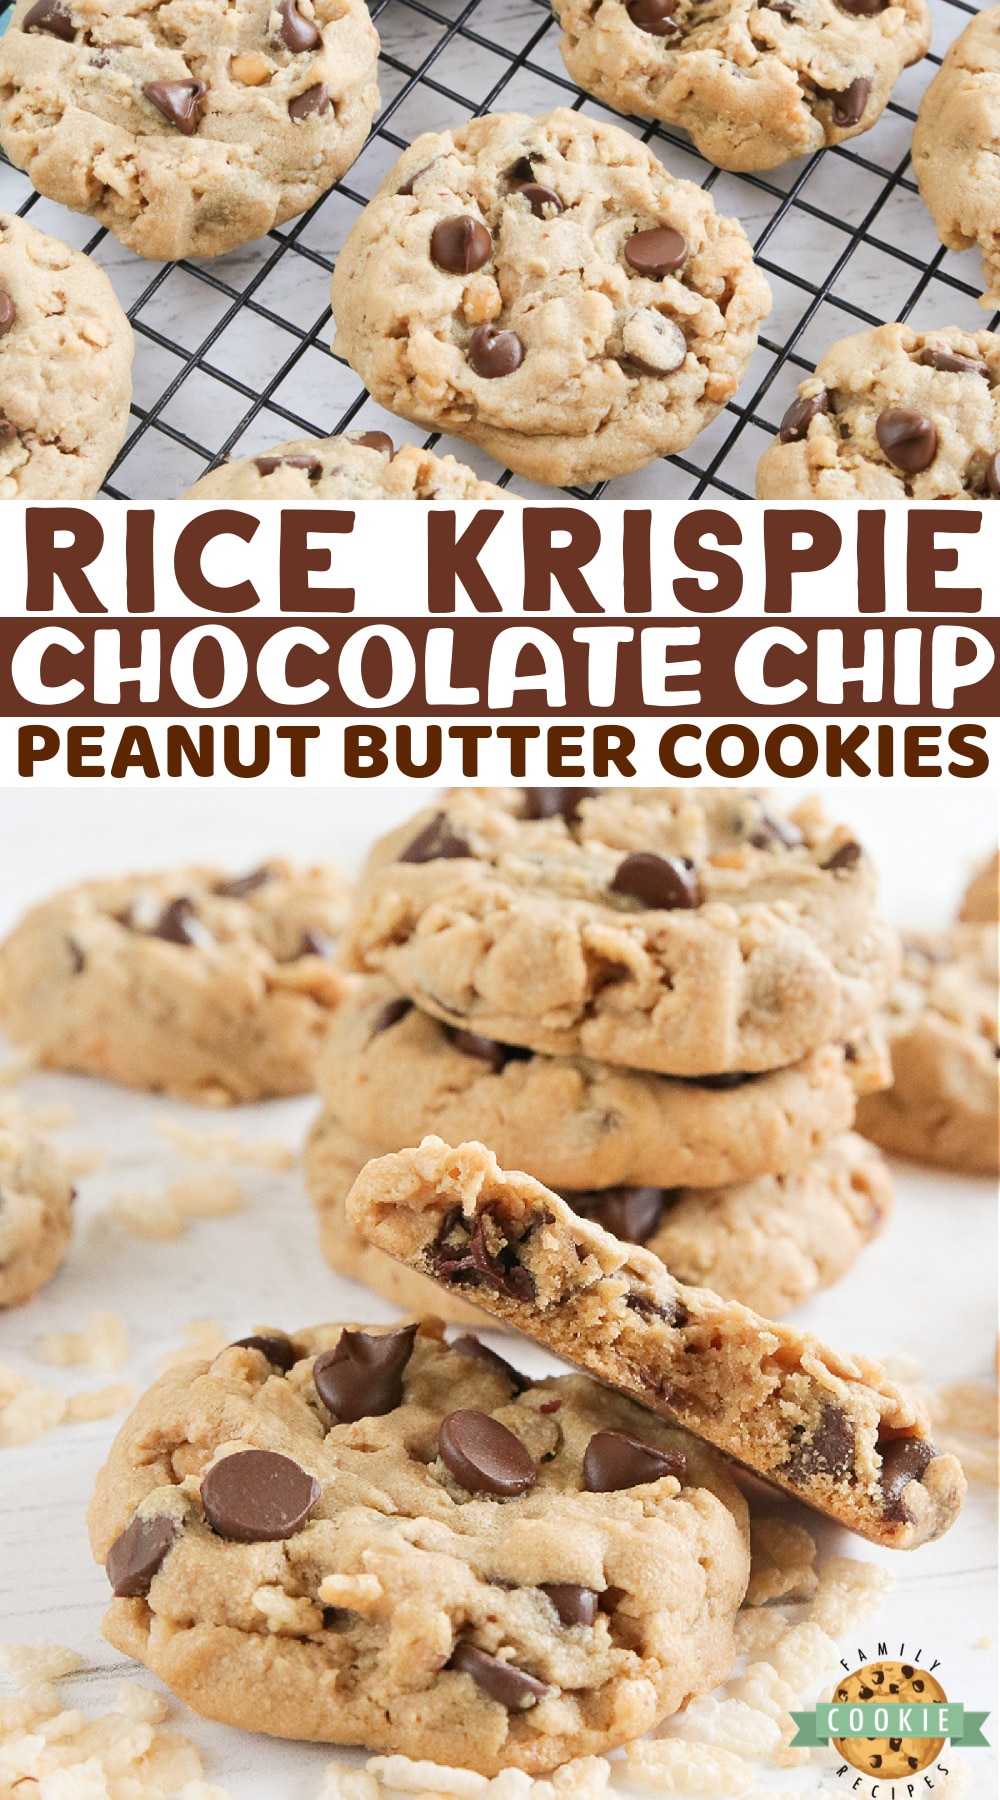 Rice Krispie Chocolate Chip Peanut Butter cookies are soft, thick and chewy peanut butter cookies with a crispy crunch in every bite. Delicious peanut butter cookie recipe that is made even better by adding chocolate chips and Rice Krispies!